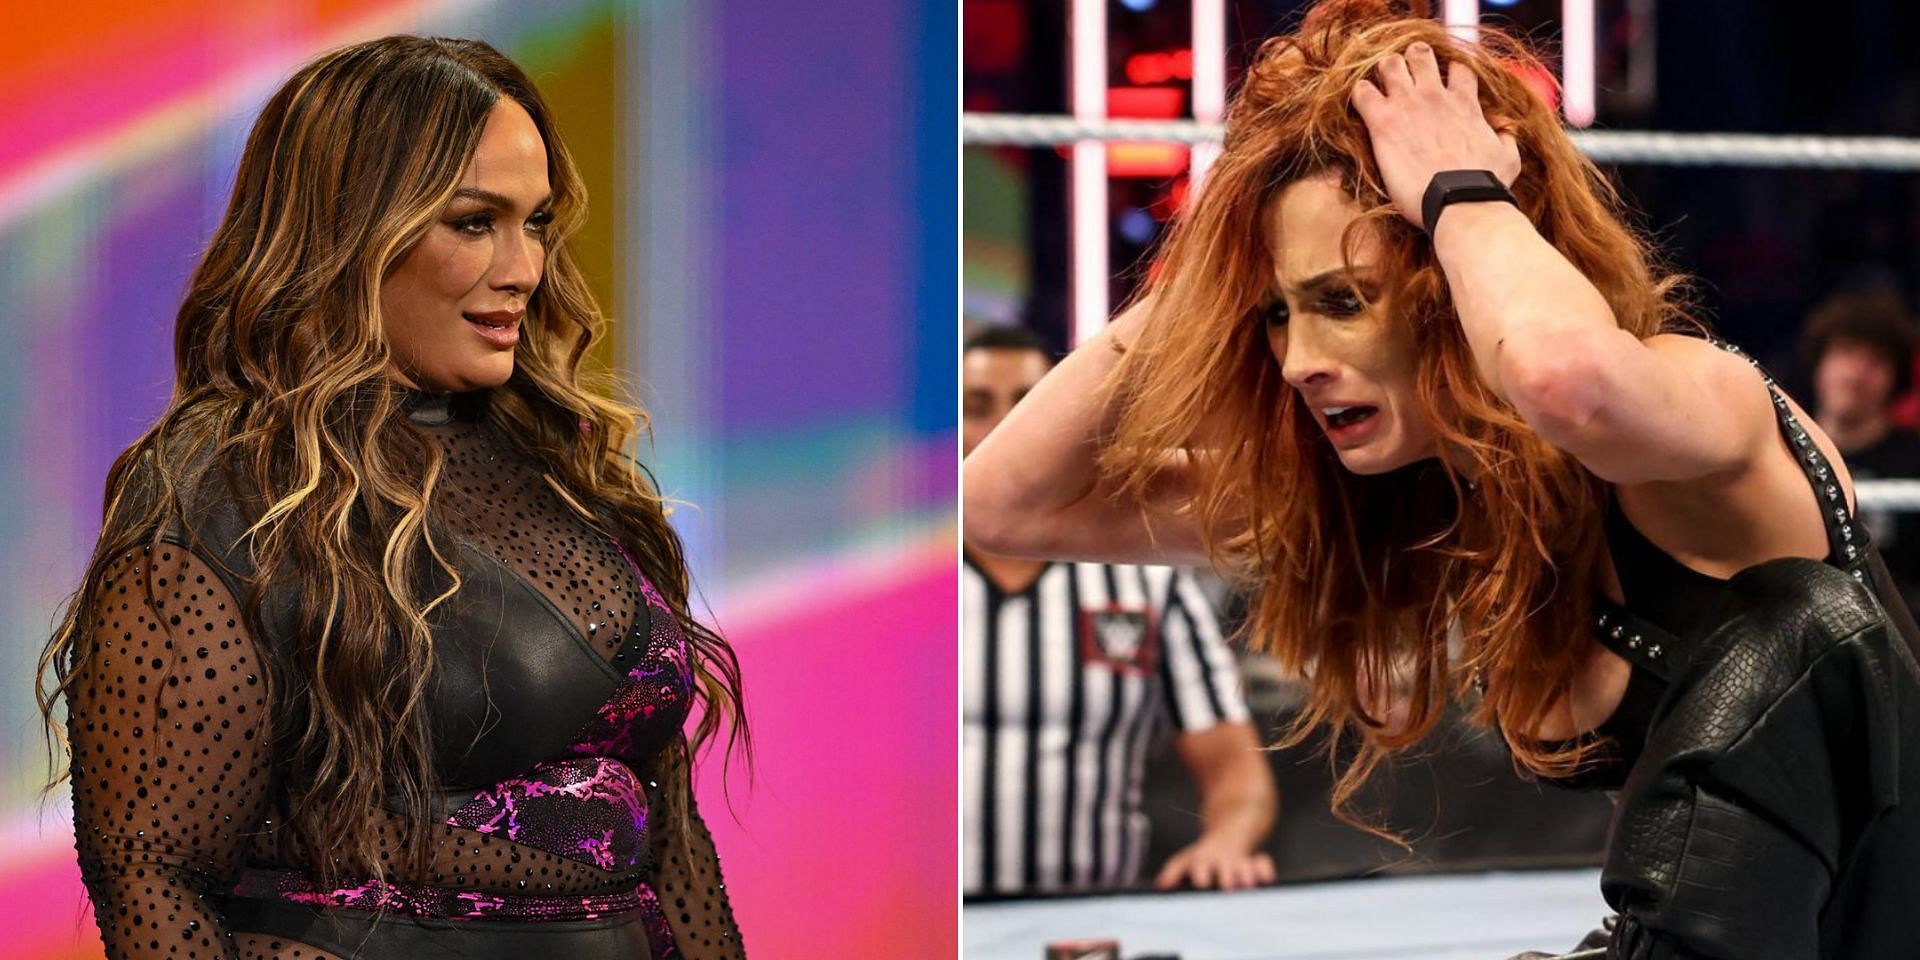 Nia Jax and Becky Lynch were involved in a brawl on RAW